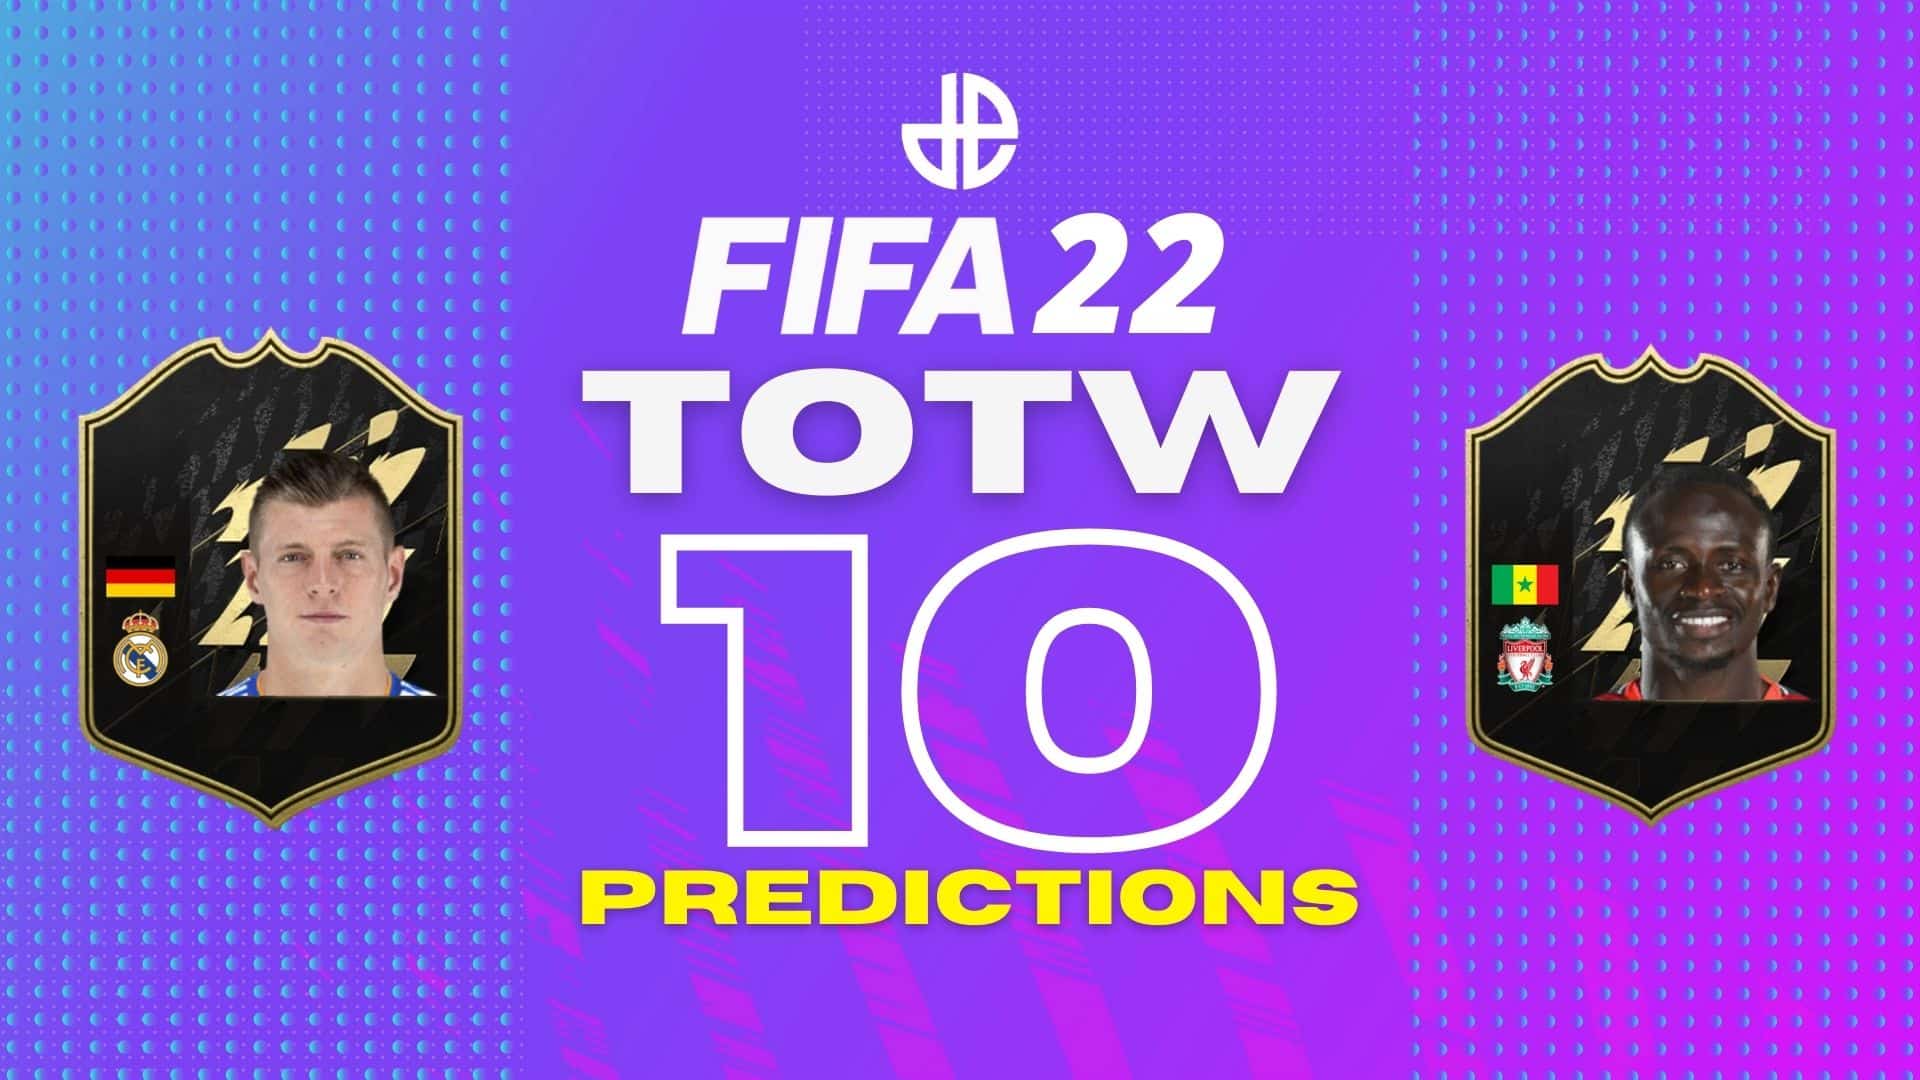 FIFA 22 TOTW 10 predictions with Kroos and Mane cards